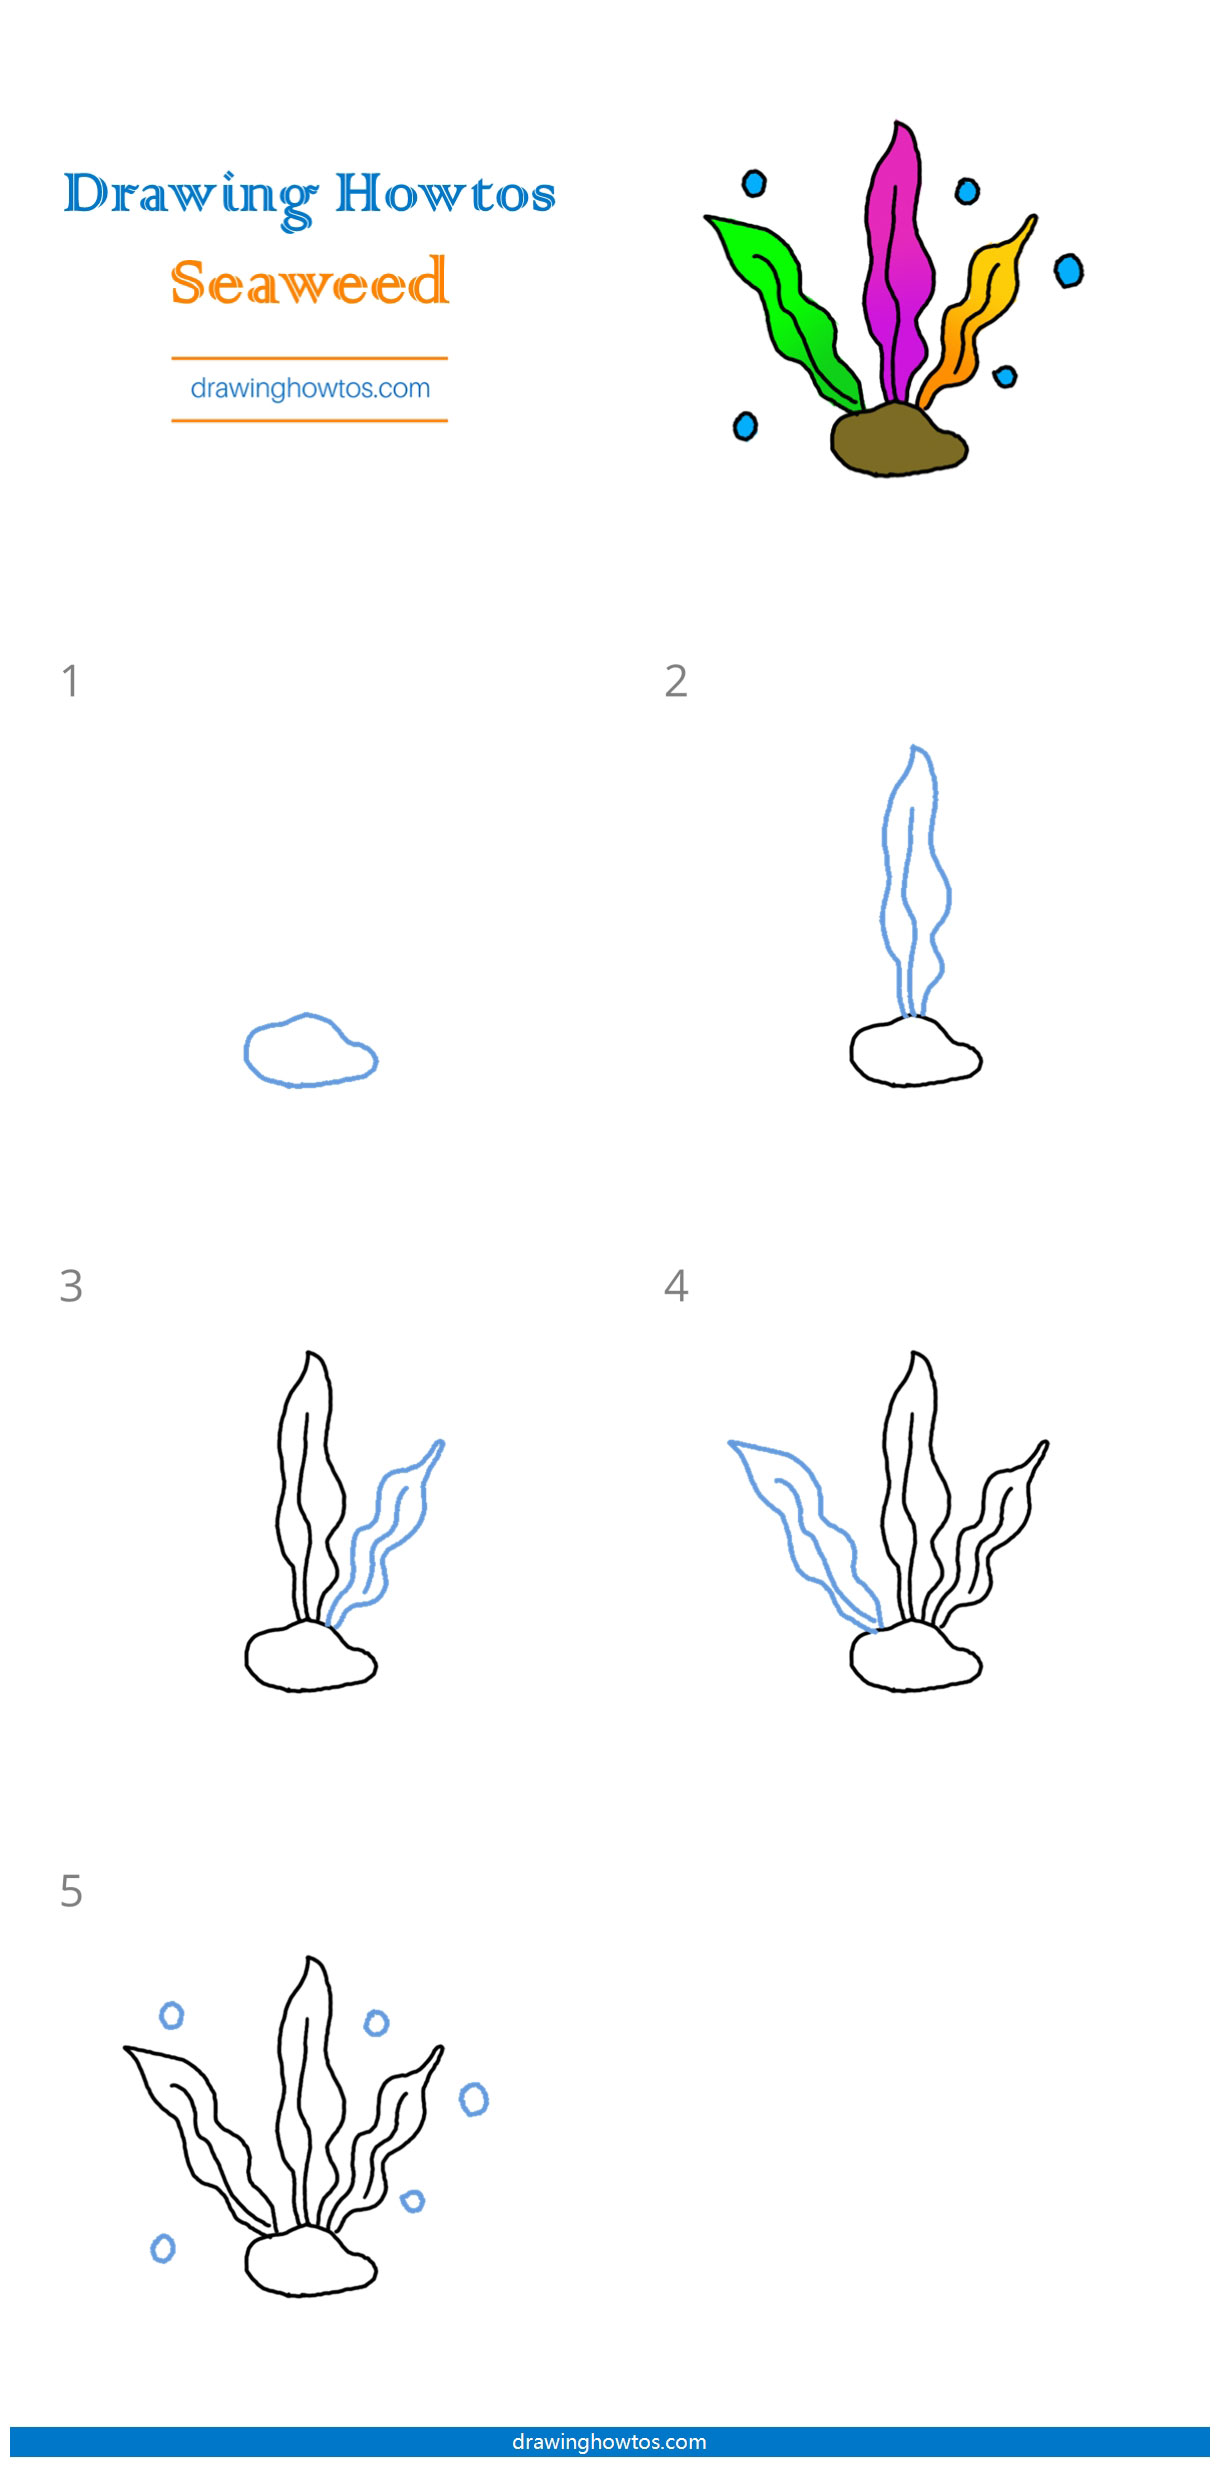 How to Draw Seaweed Step by Step Easy Drawing Guides Drawing Howtos